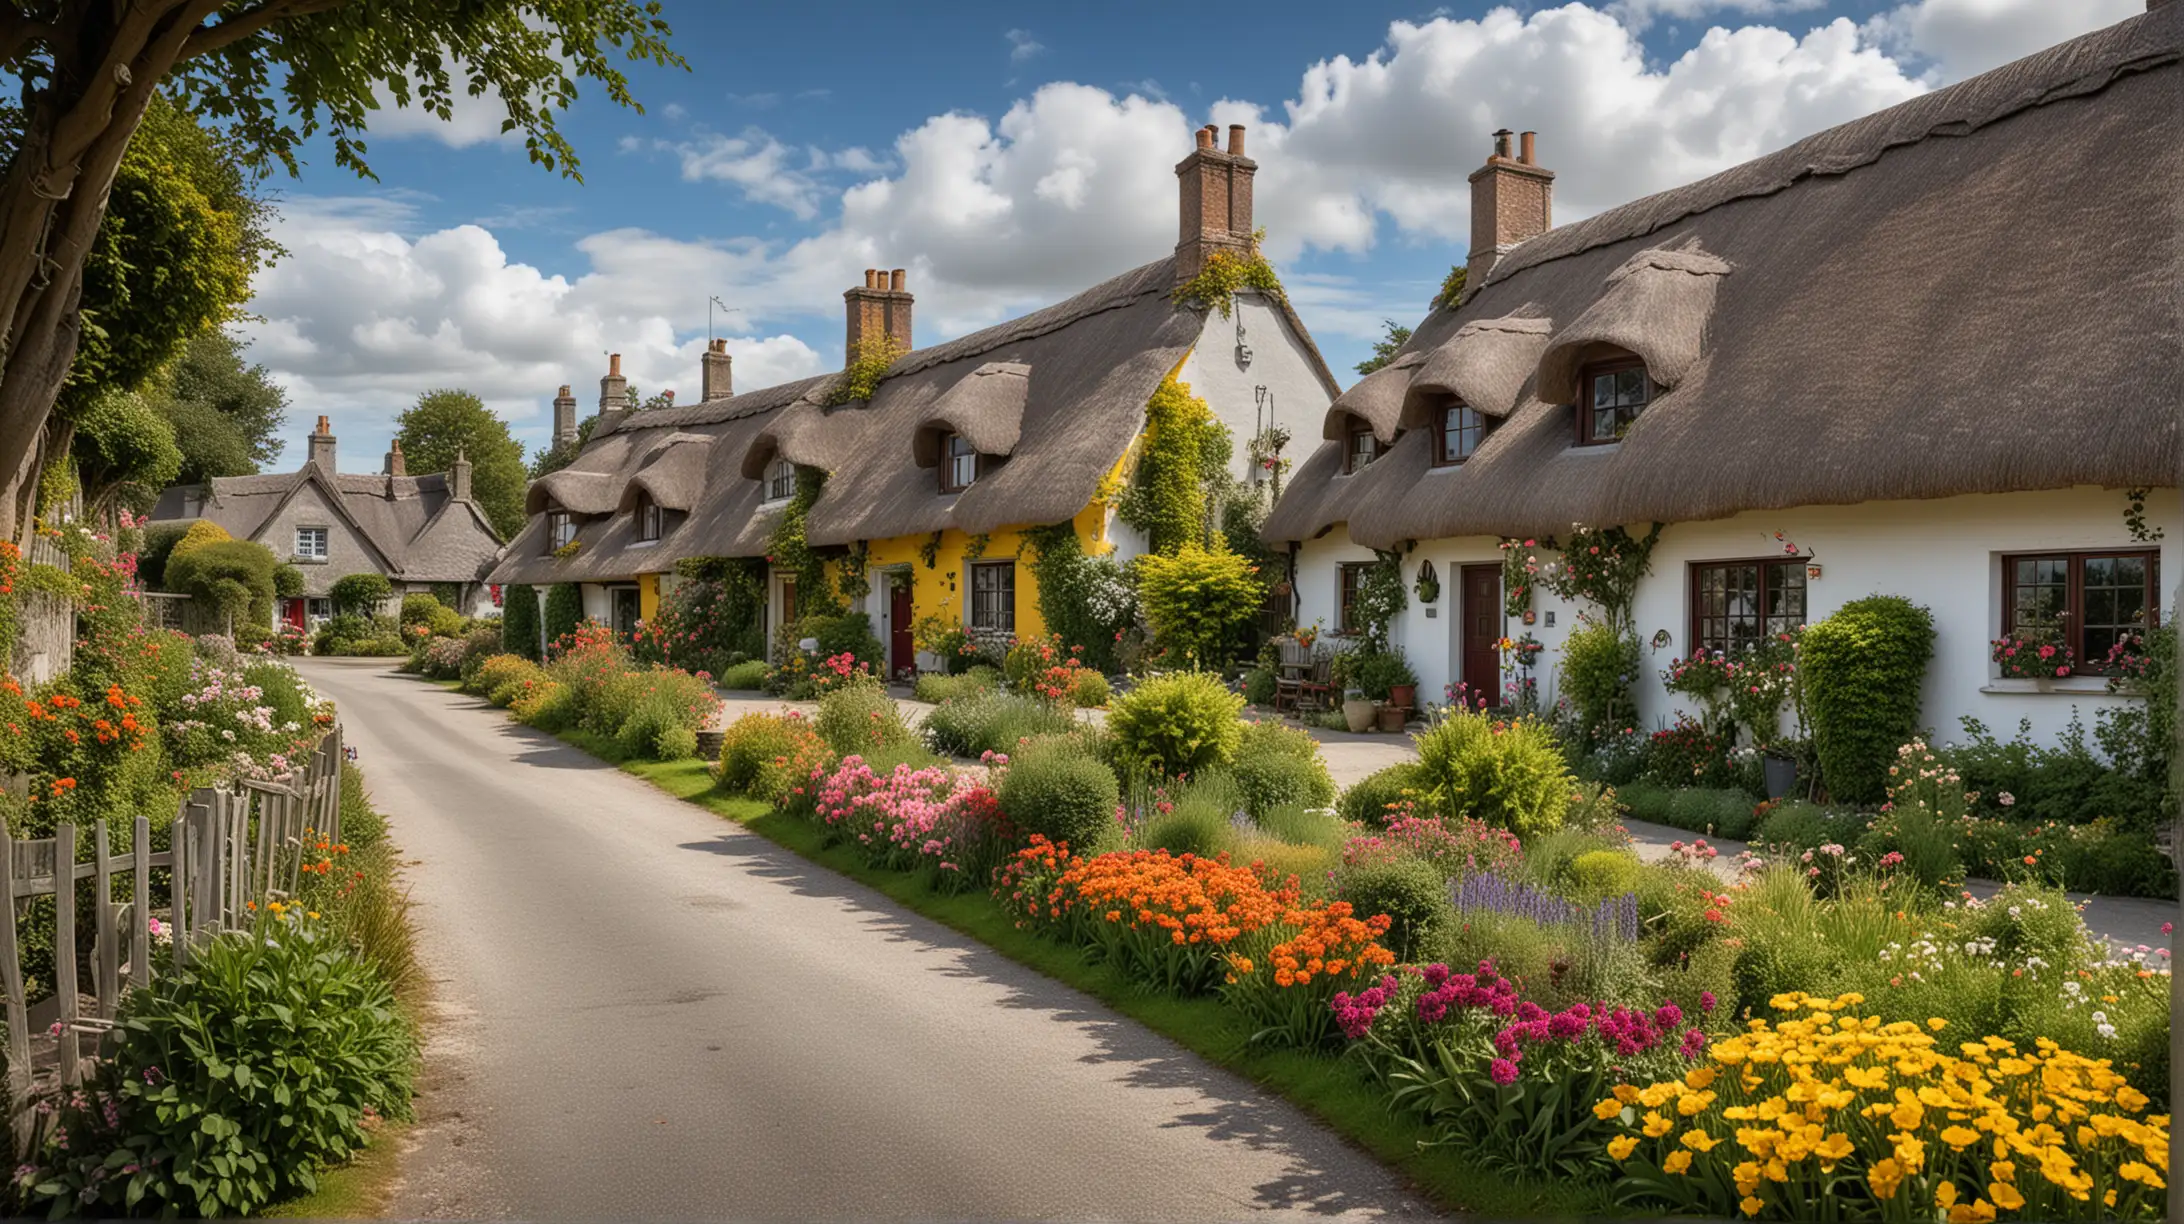 high resolution photograph of the picturesque village of Adare, with its thatched cottages and colorful garden, canon EOS R8 with 28mm lens
